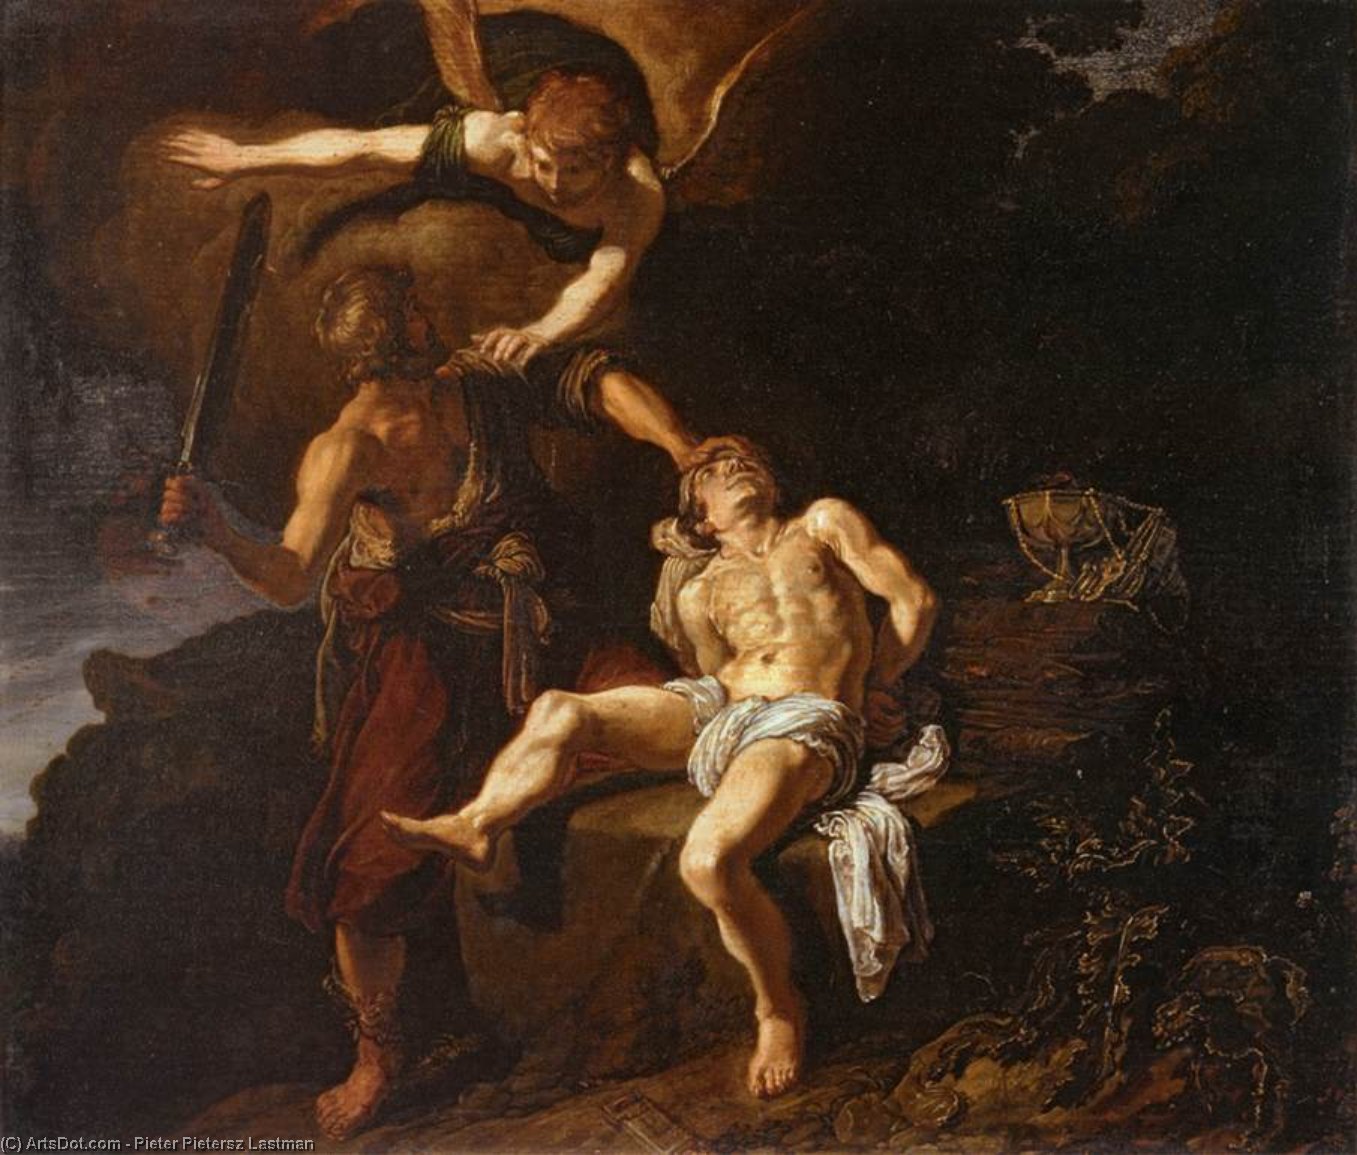 Order Artwork Replica The Angel Of The Lord Preventing Abraham From Sacrificing His Son Isaac by Pieter Pietersz Lastman (1583-1633, Dutch Empire) | ArtsDot.com